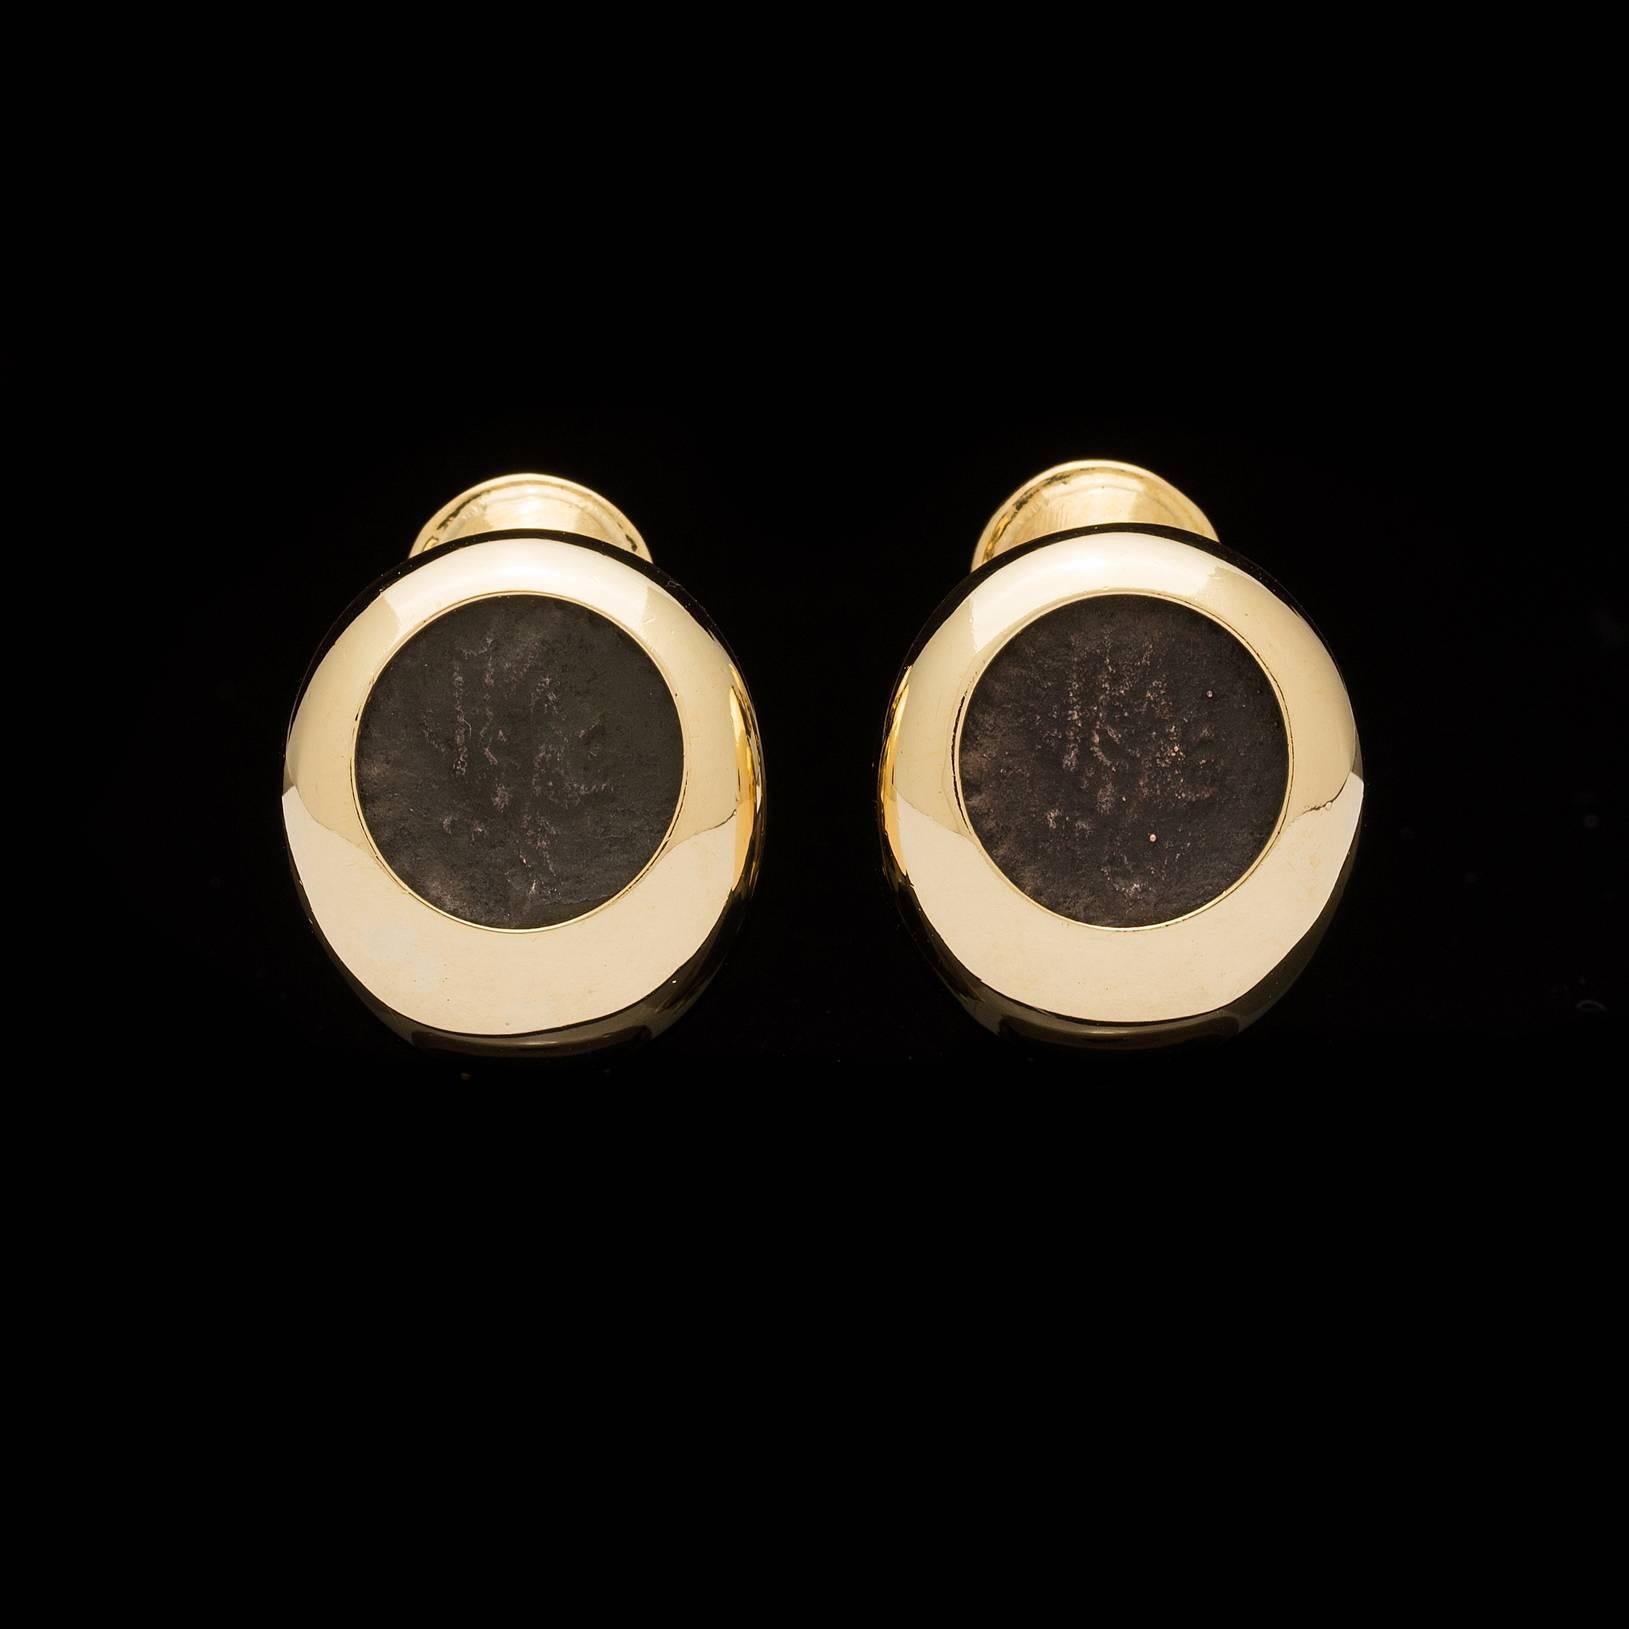 Estate earrings feature two Roman coins set in bold 18k yellow gold clips.  The earrings measure 3/4 of an inch by  5/8 of an inch, and weigh 14.3 grams total.